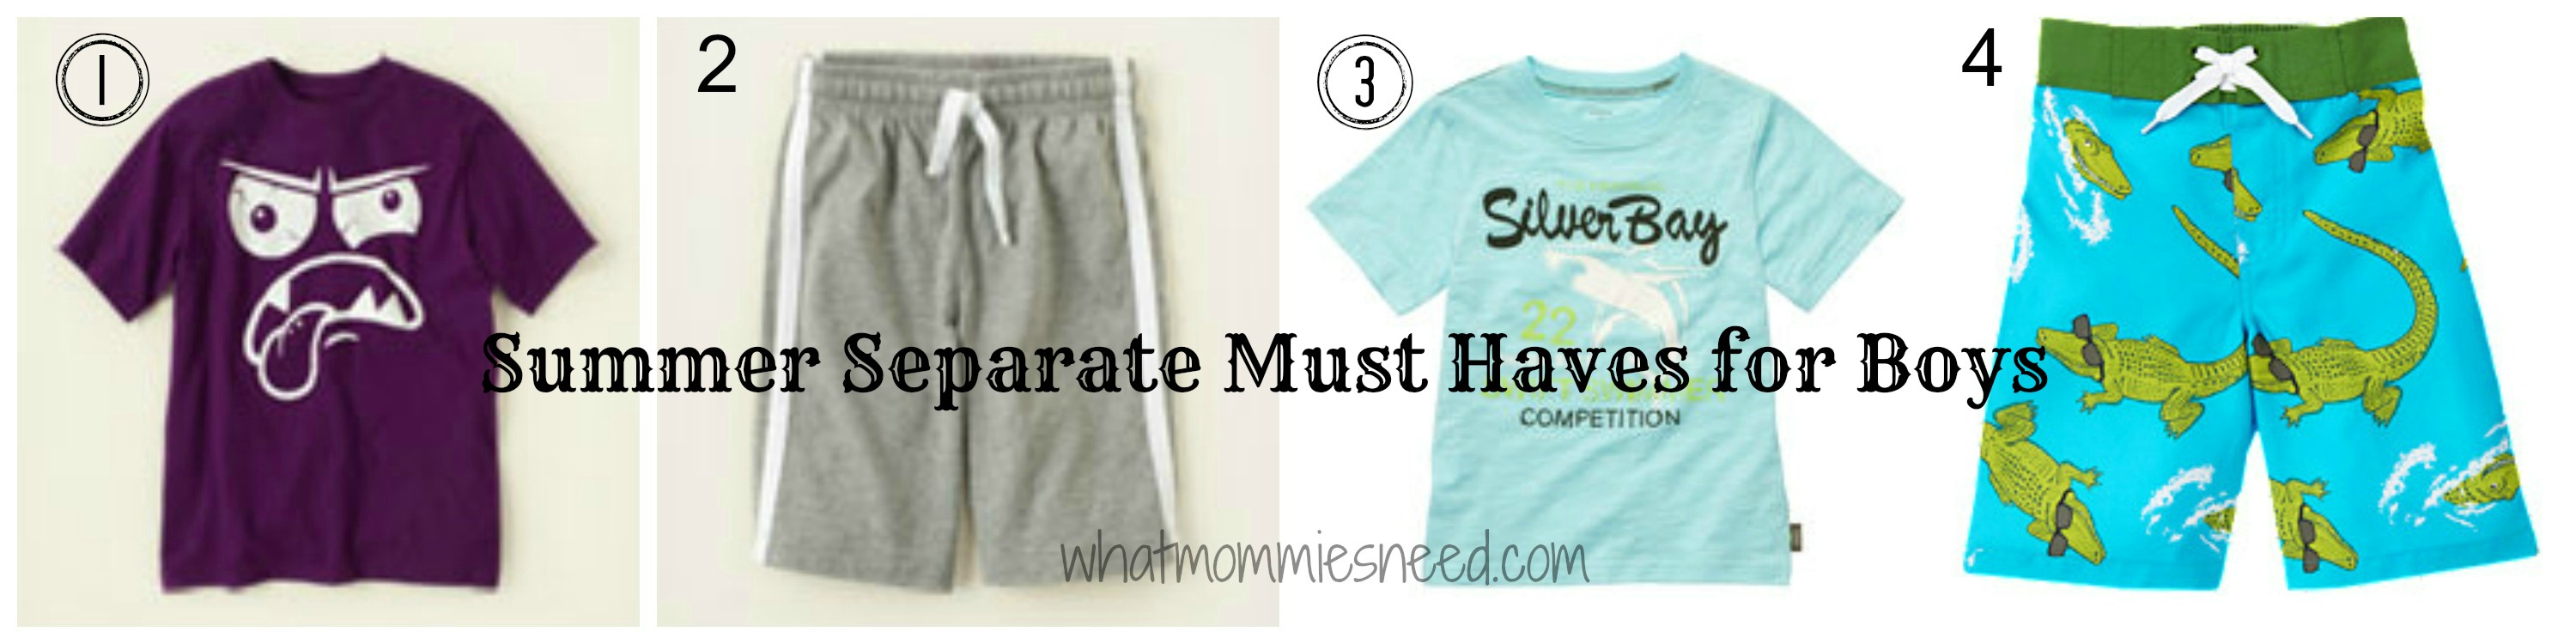 Summer Separate Must Haves for Boys